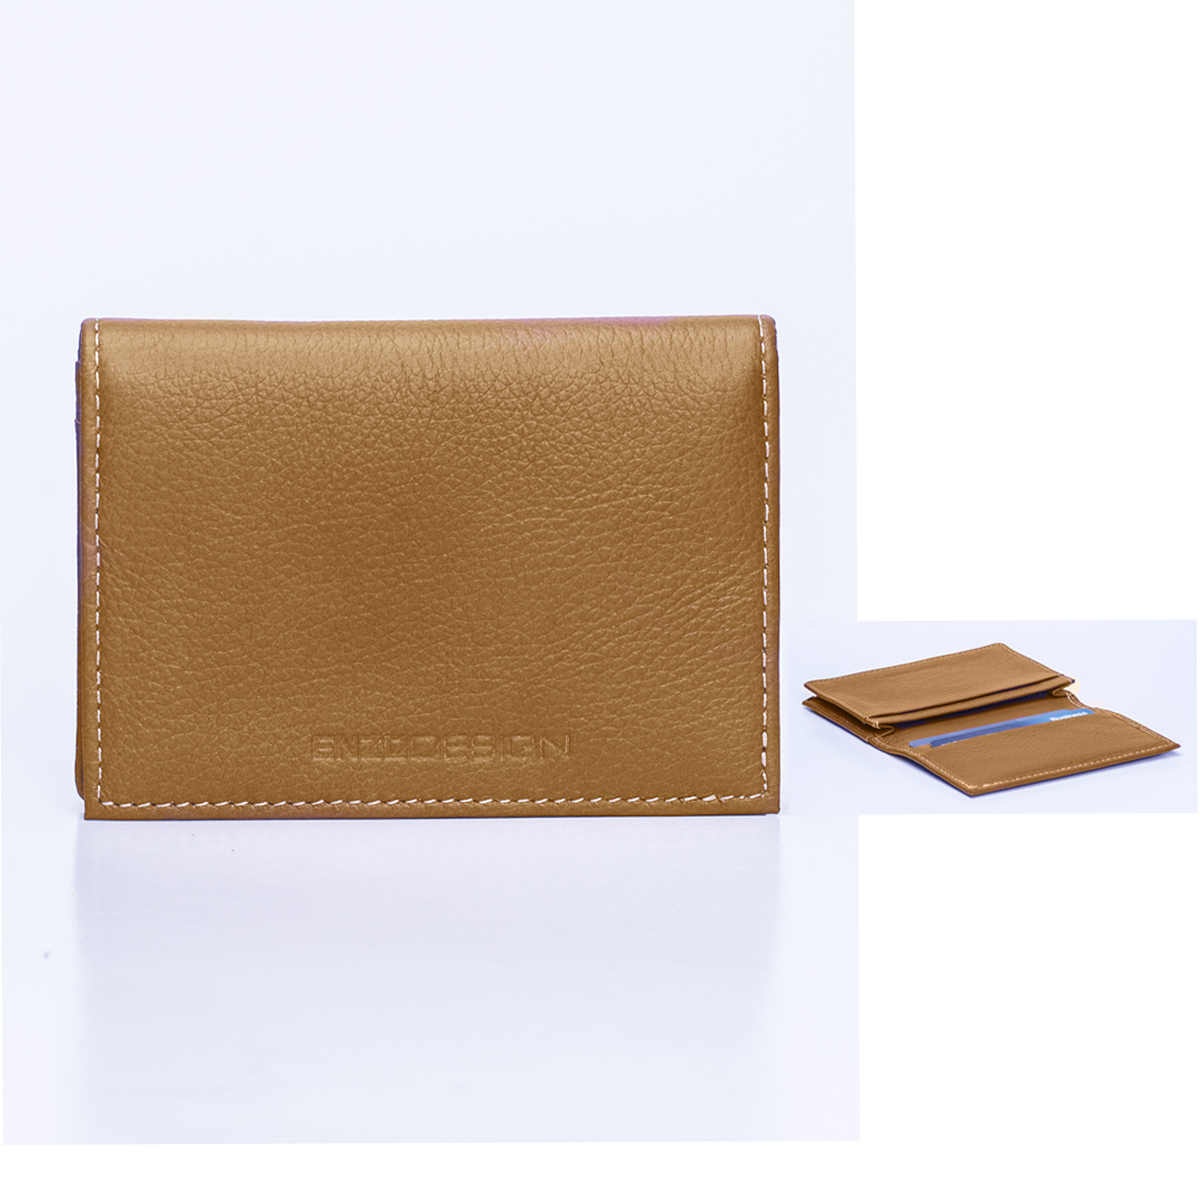 Soho Tan Color Leather Business Card Holder